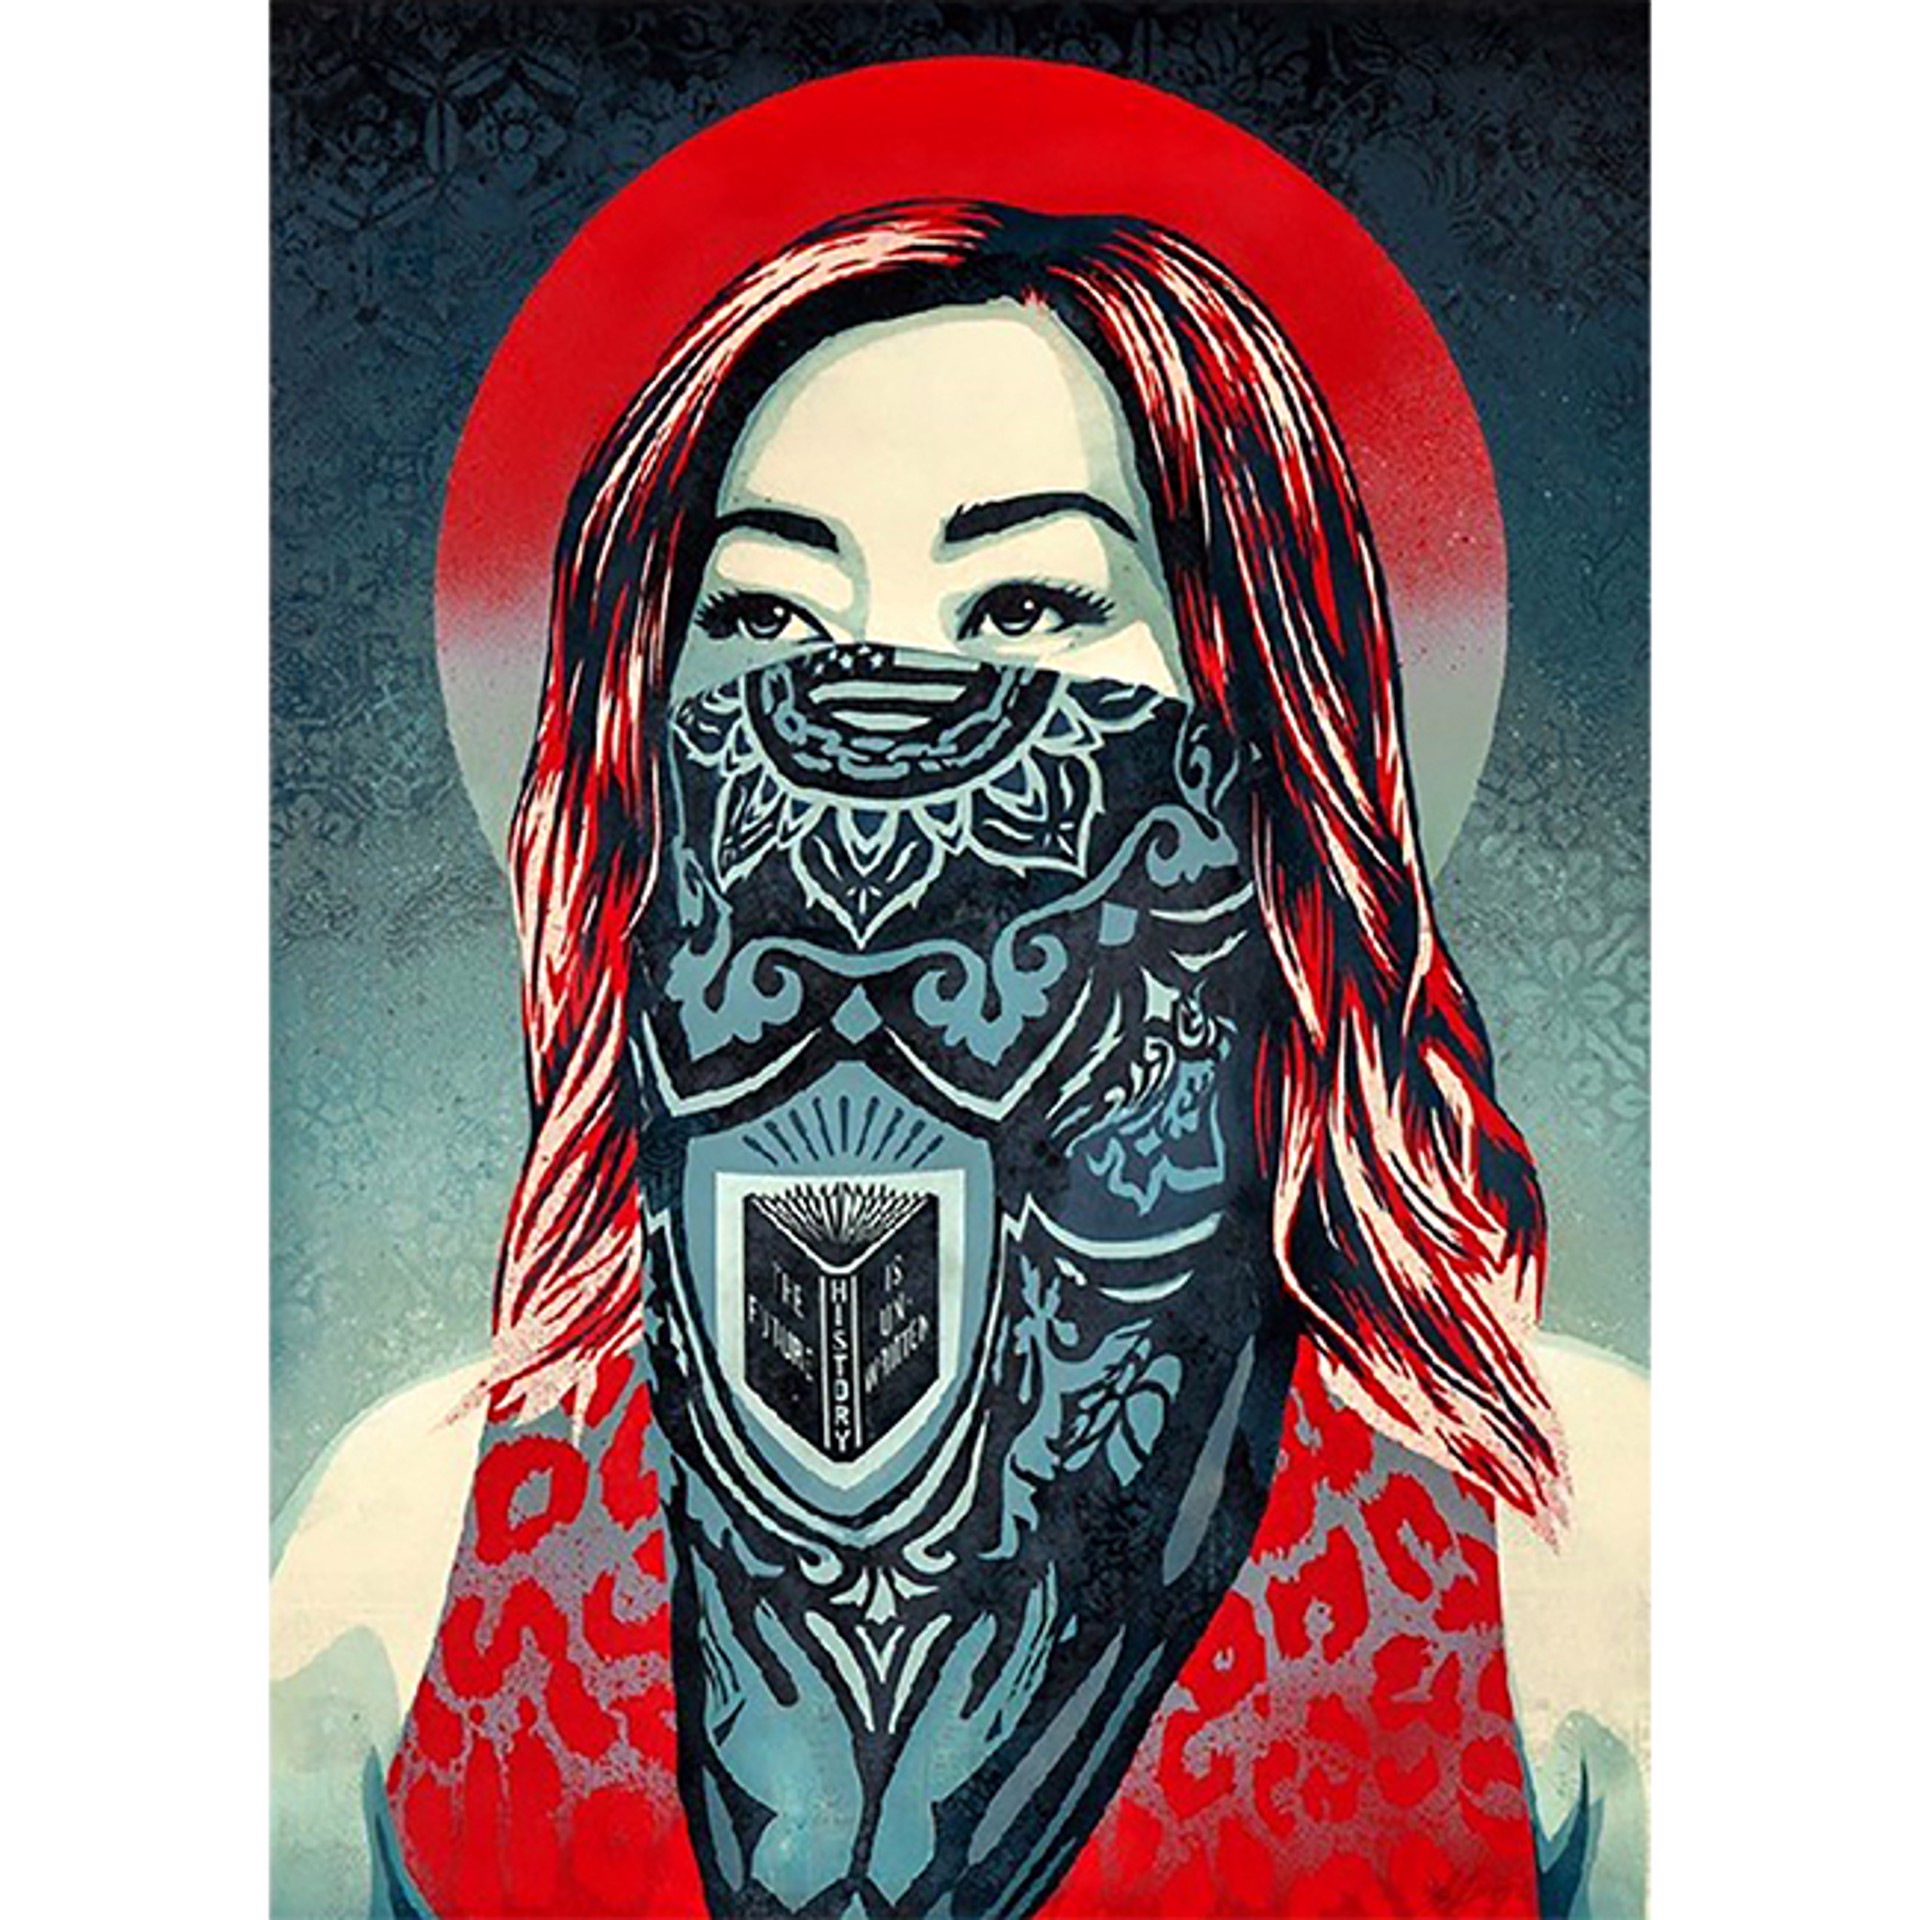 Just Future Rising, Version 4 by Shepard Fairey